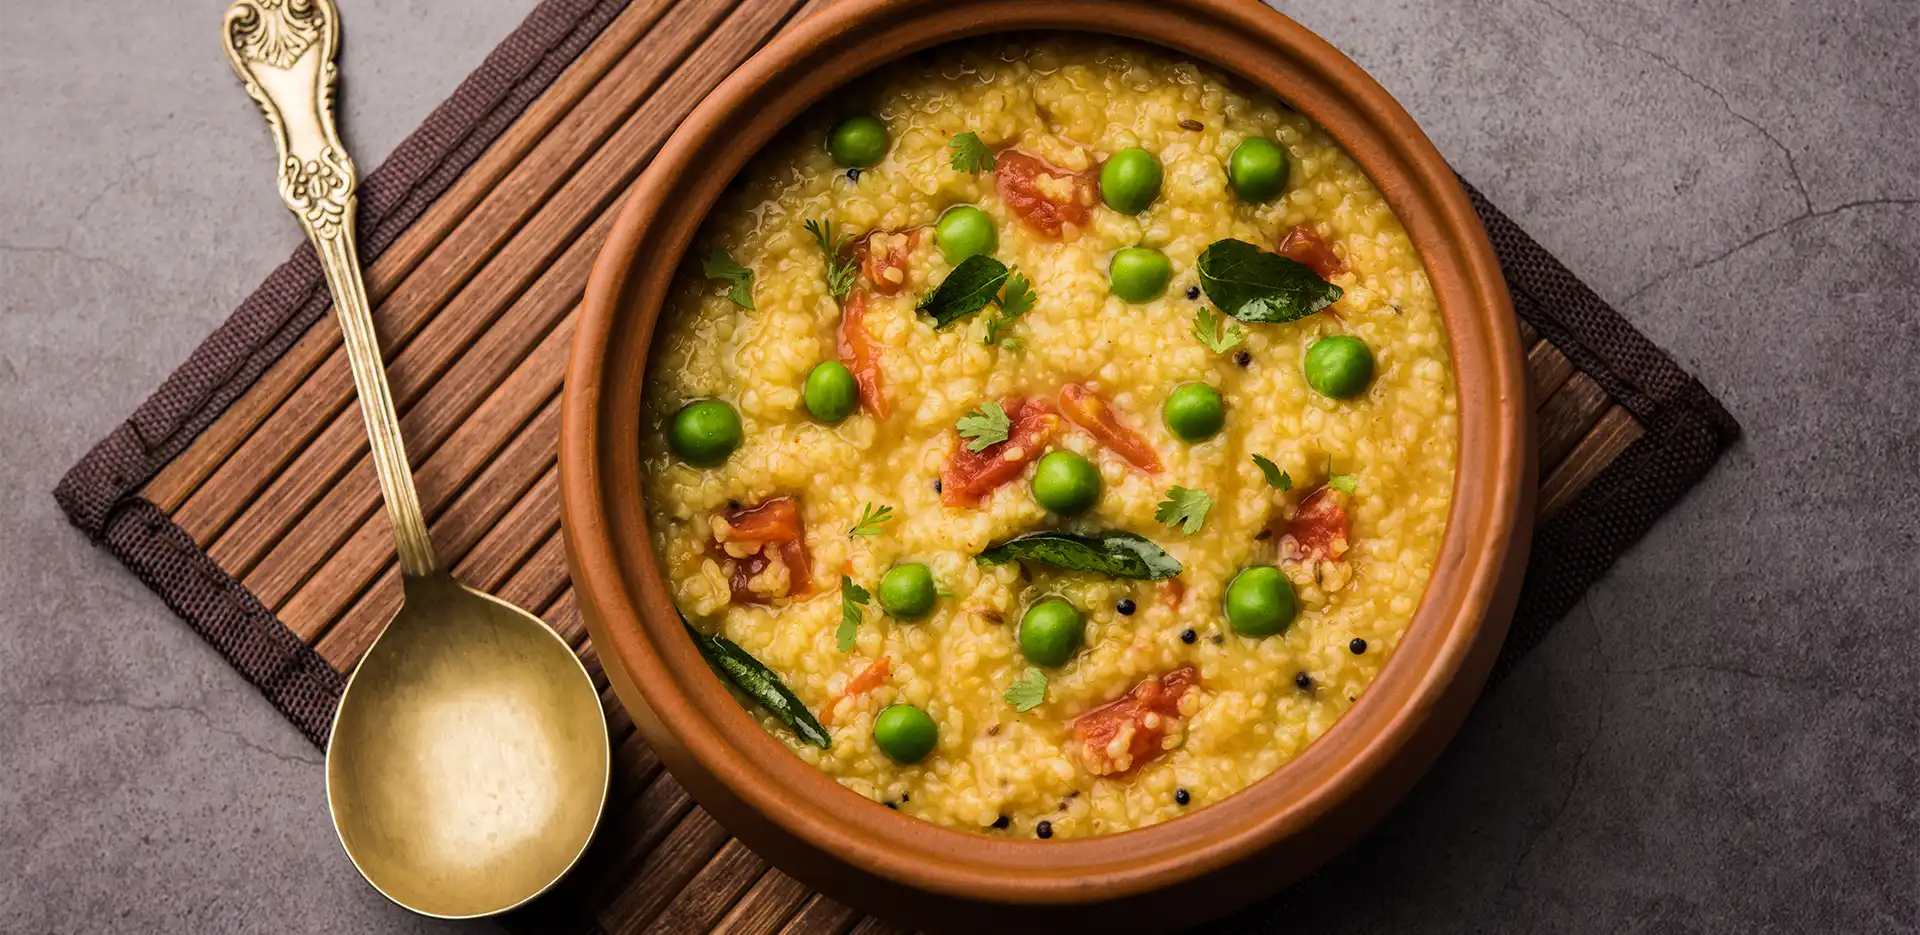 Types of Khichdi in India